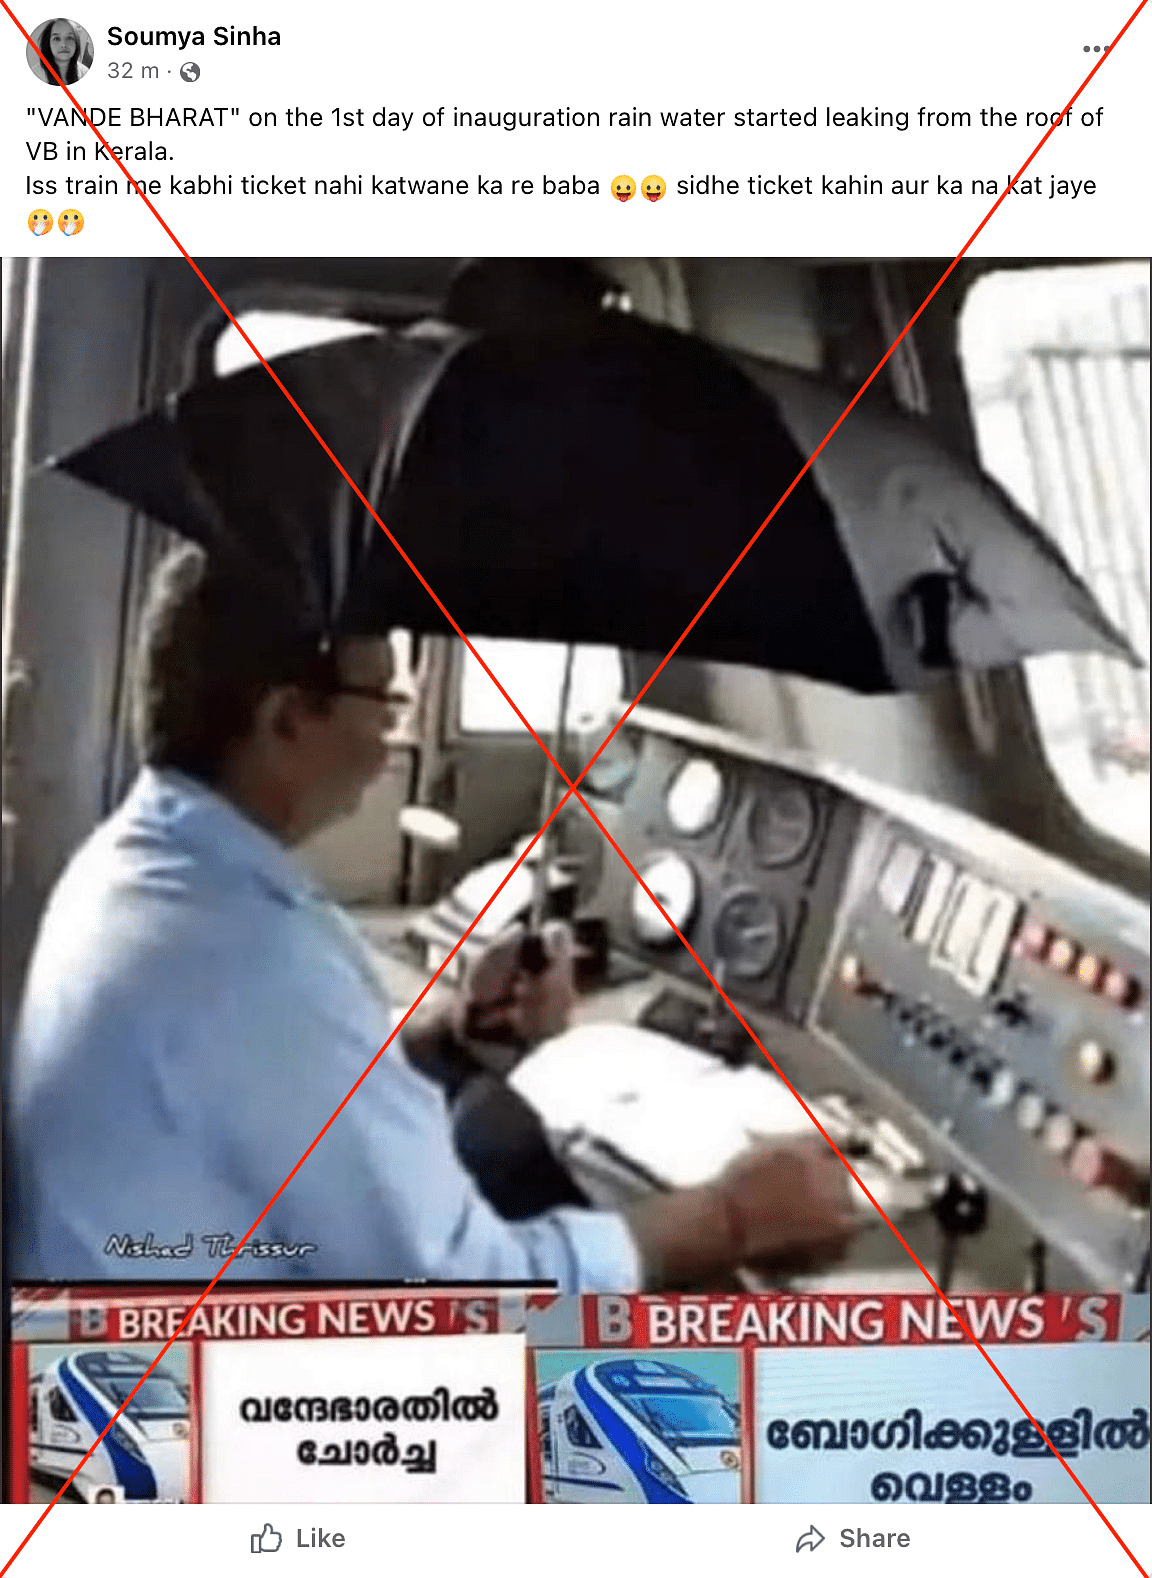 The visual dates back to 2017 and shows the loco pilot of a train running through Jharkhand.